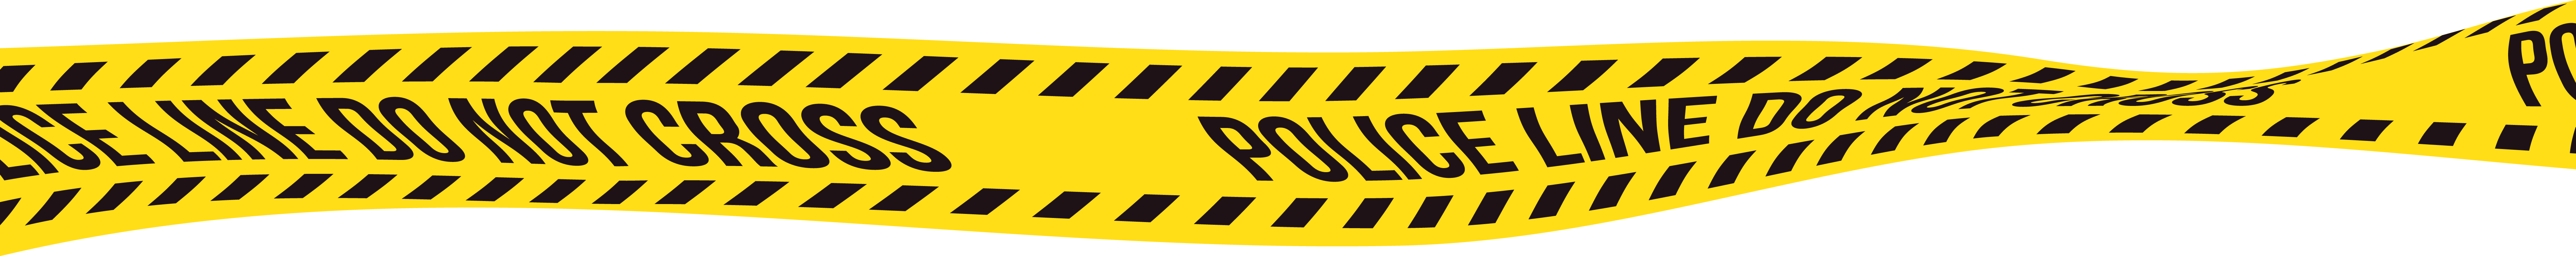 Police Tape Download Free PNG